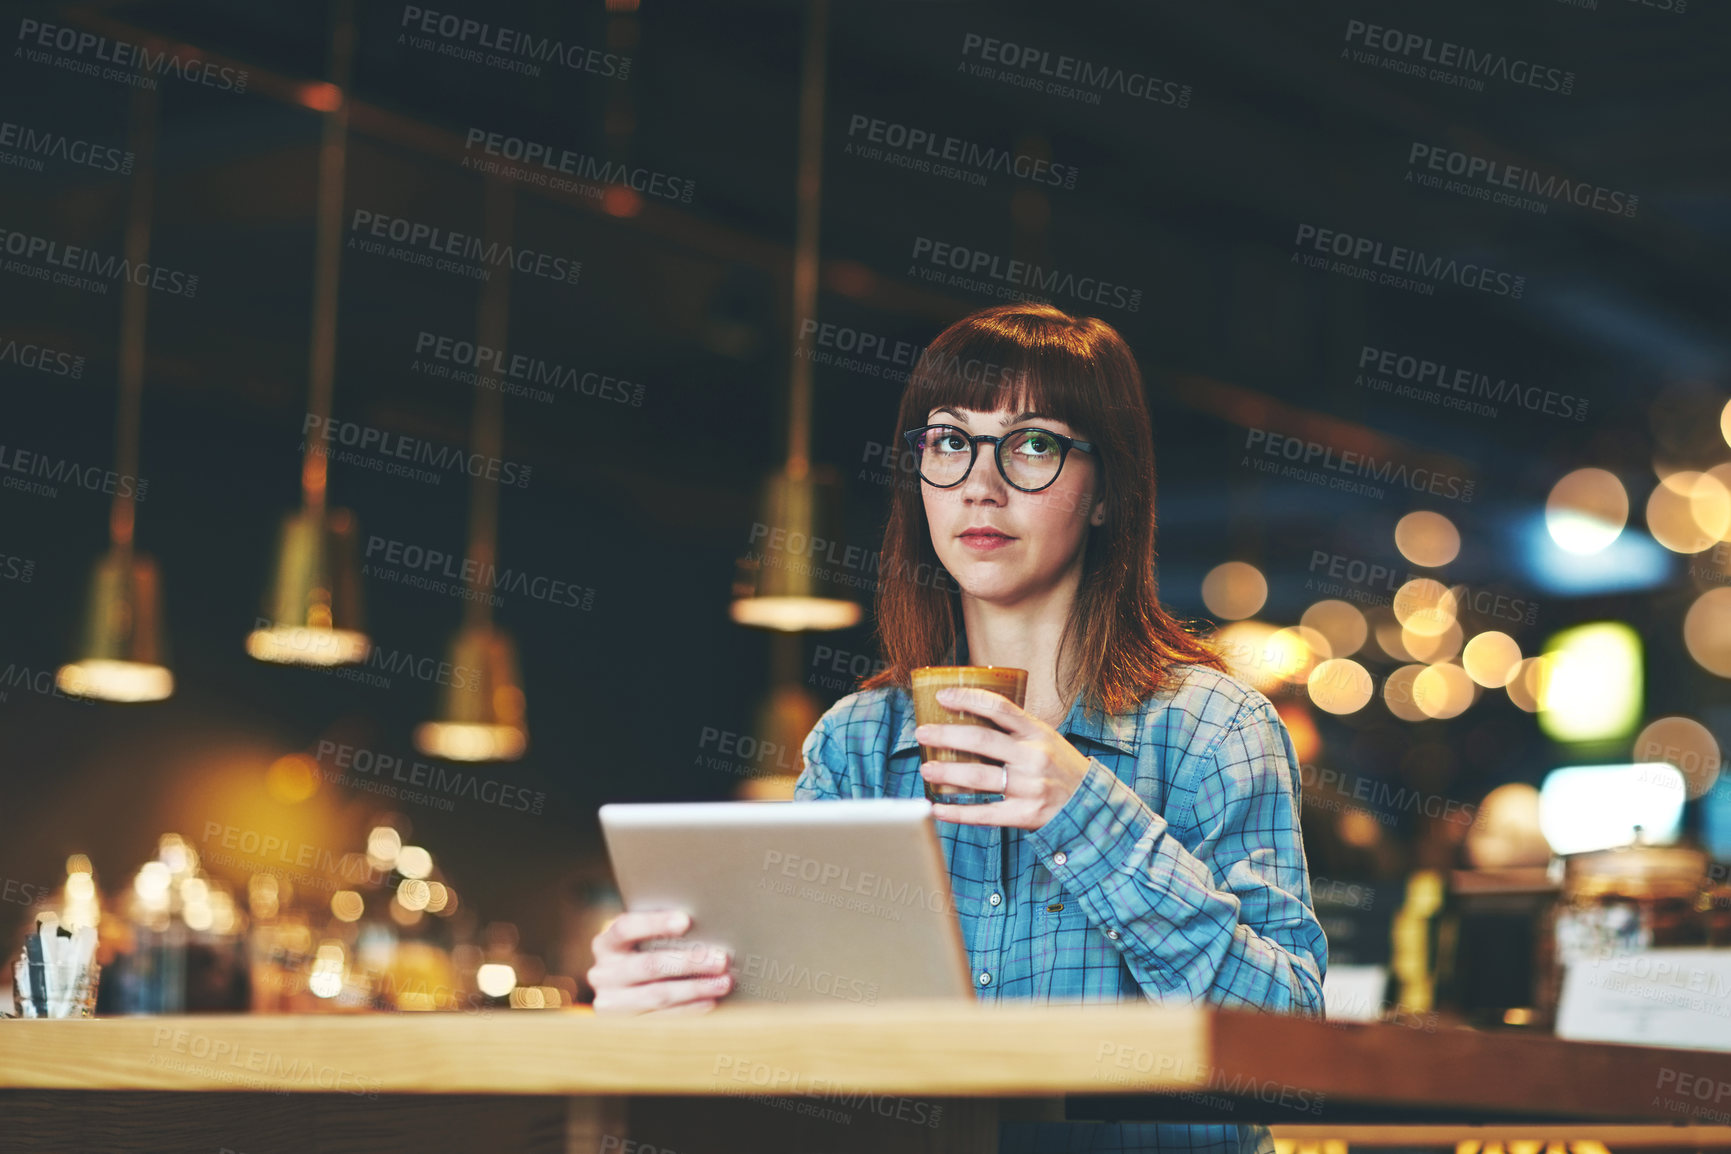 Buy stock photo Shot of an attractive young woman looking thoughtful while using a digital tablet in a cafe